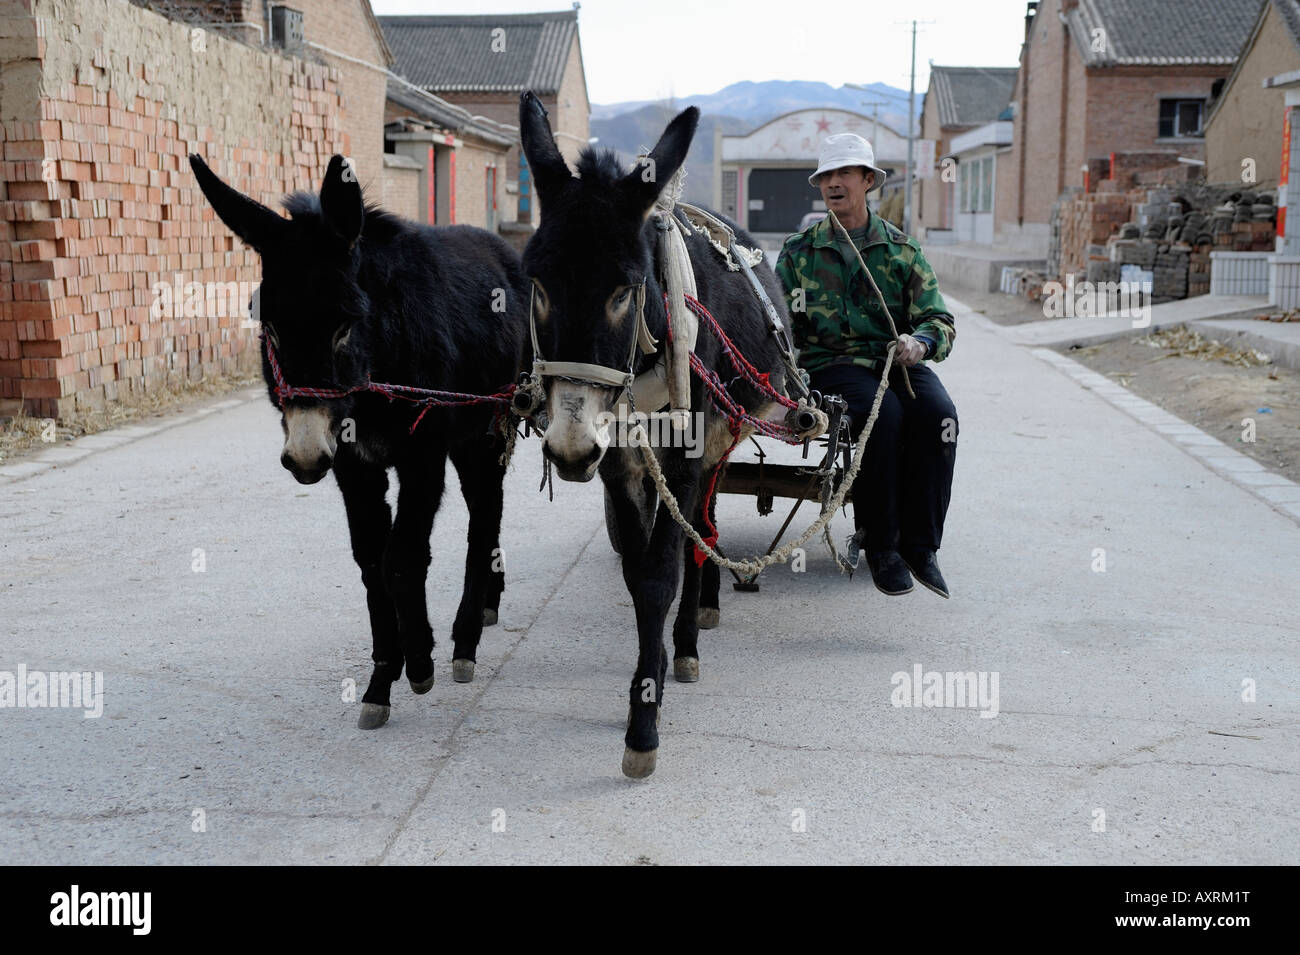 A farmer drives donkey cart in a village in Chicheng county, Hebei province, China. 28-Mar-2008 Stock Photo